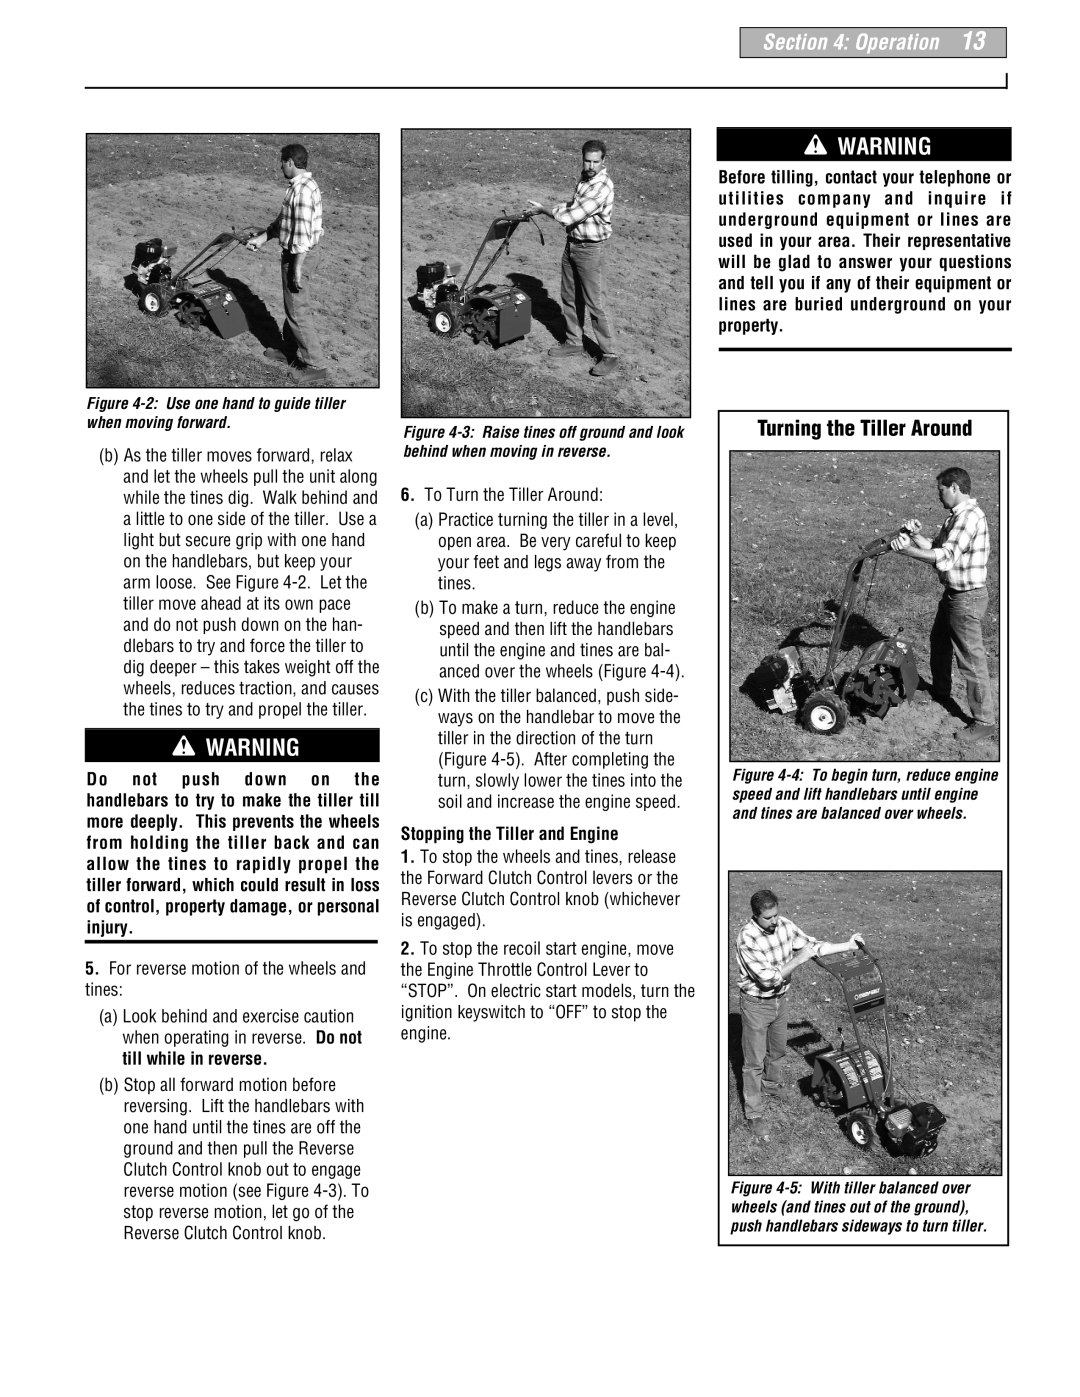 Troy-Bilt 664D-Pony manual Operation, Turning the Tiller Around, Stopping the Tiller and Engine 